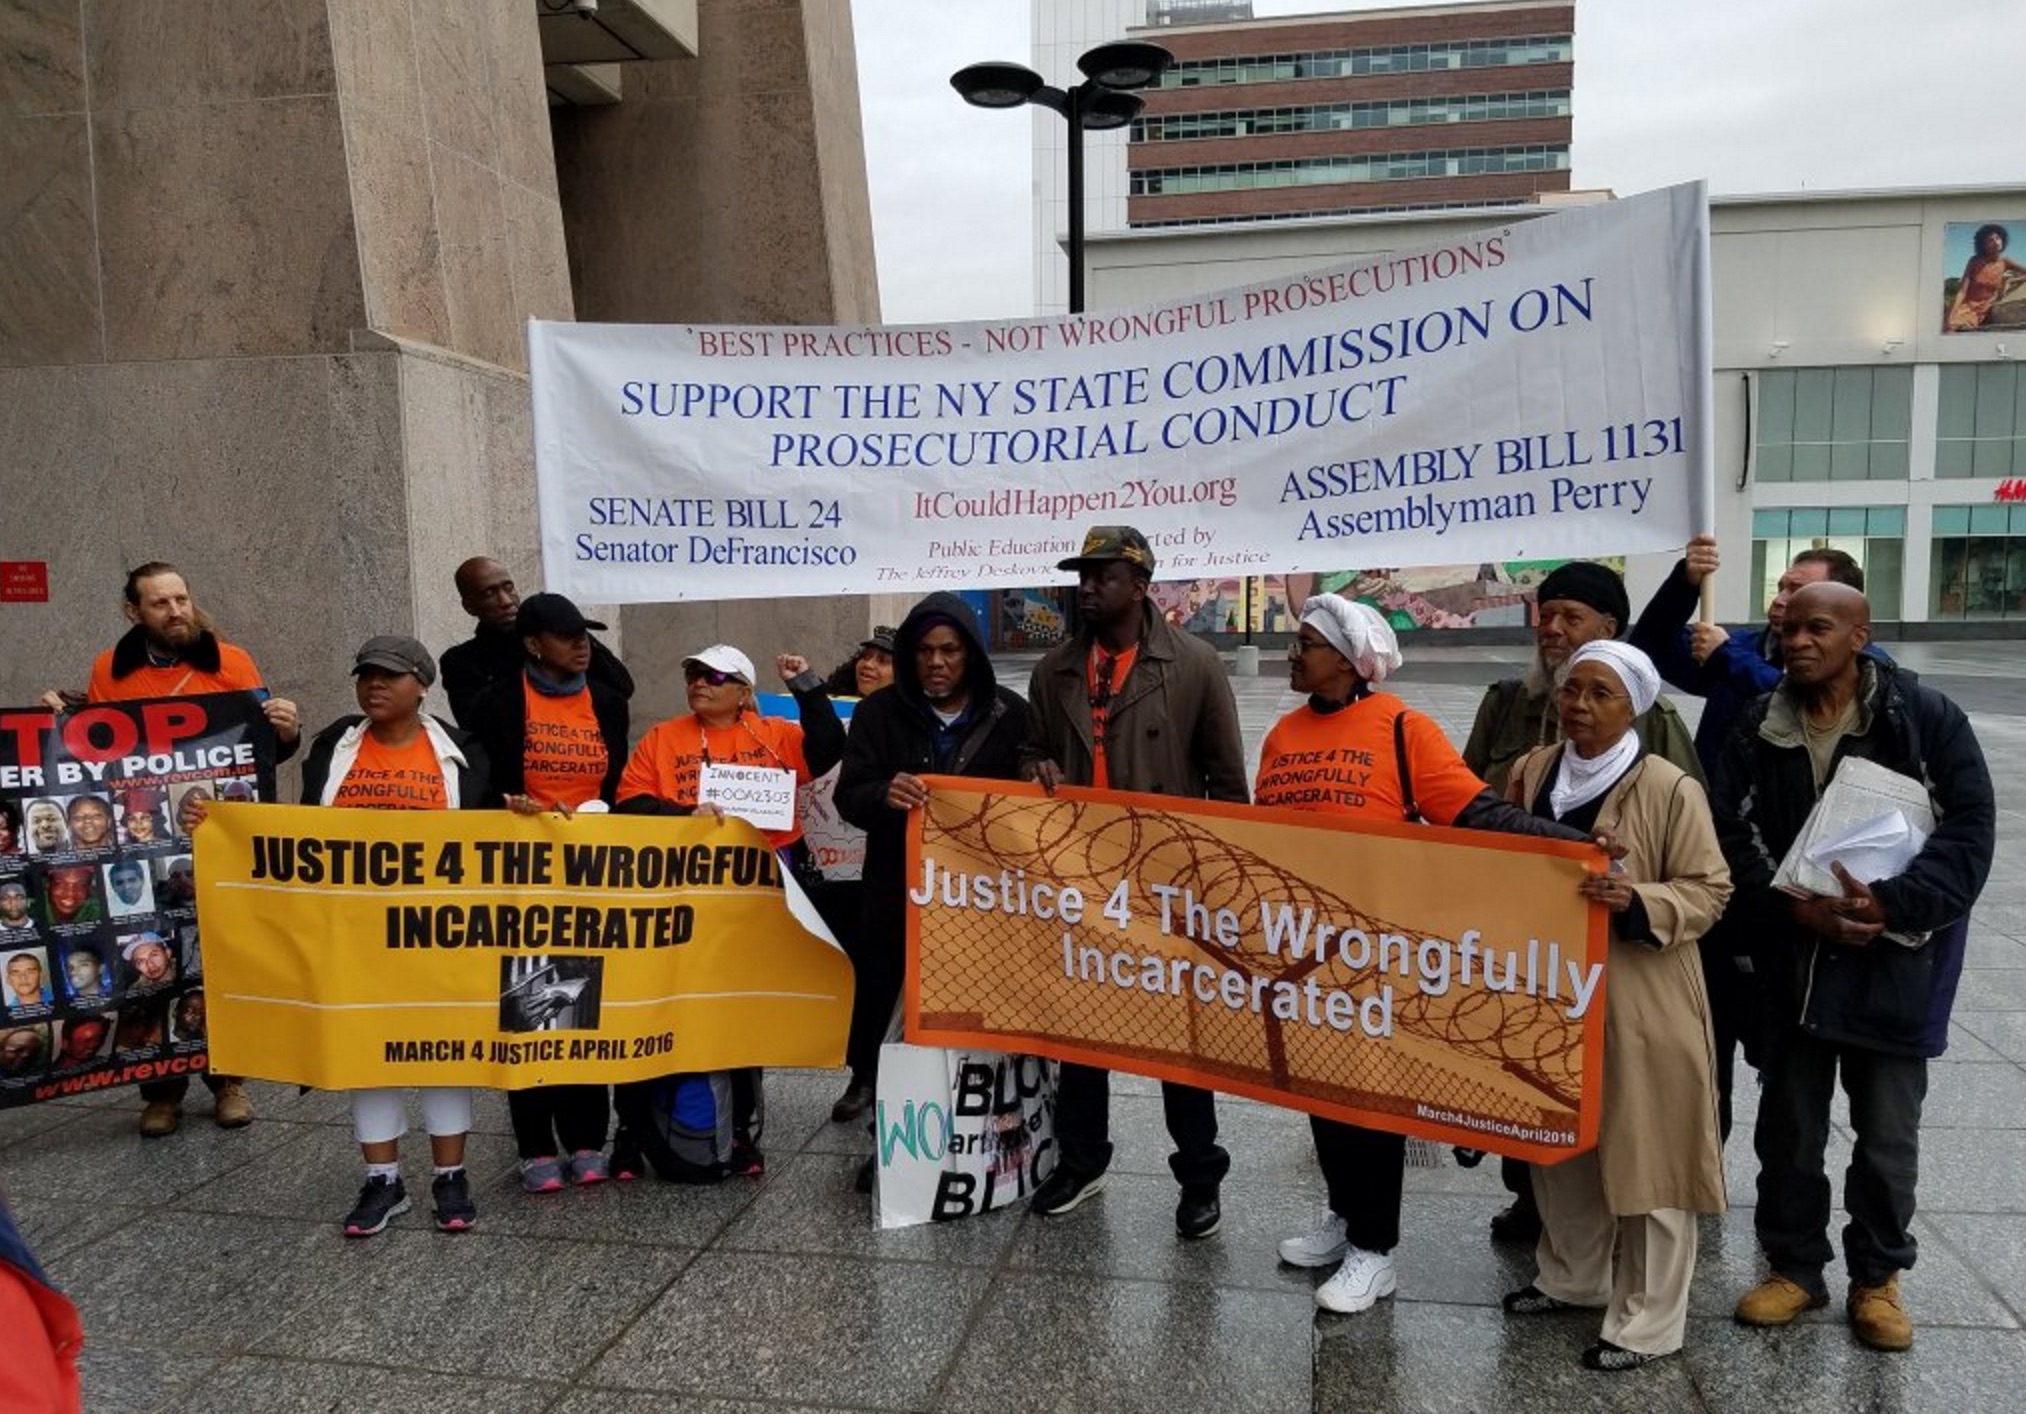 Justice 4 Wrongfully Incarcerated march to Albany began in Harlem, New York on May 8, 2016 (Photo by Maddy DeLone). 